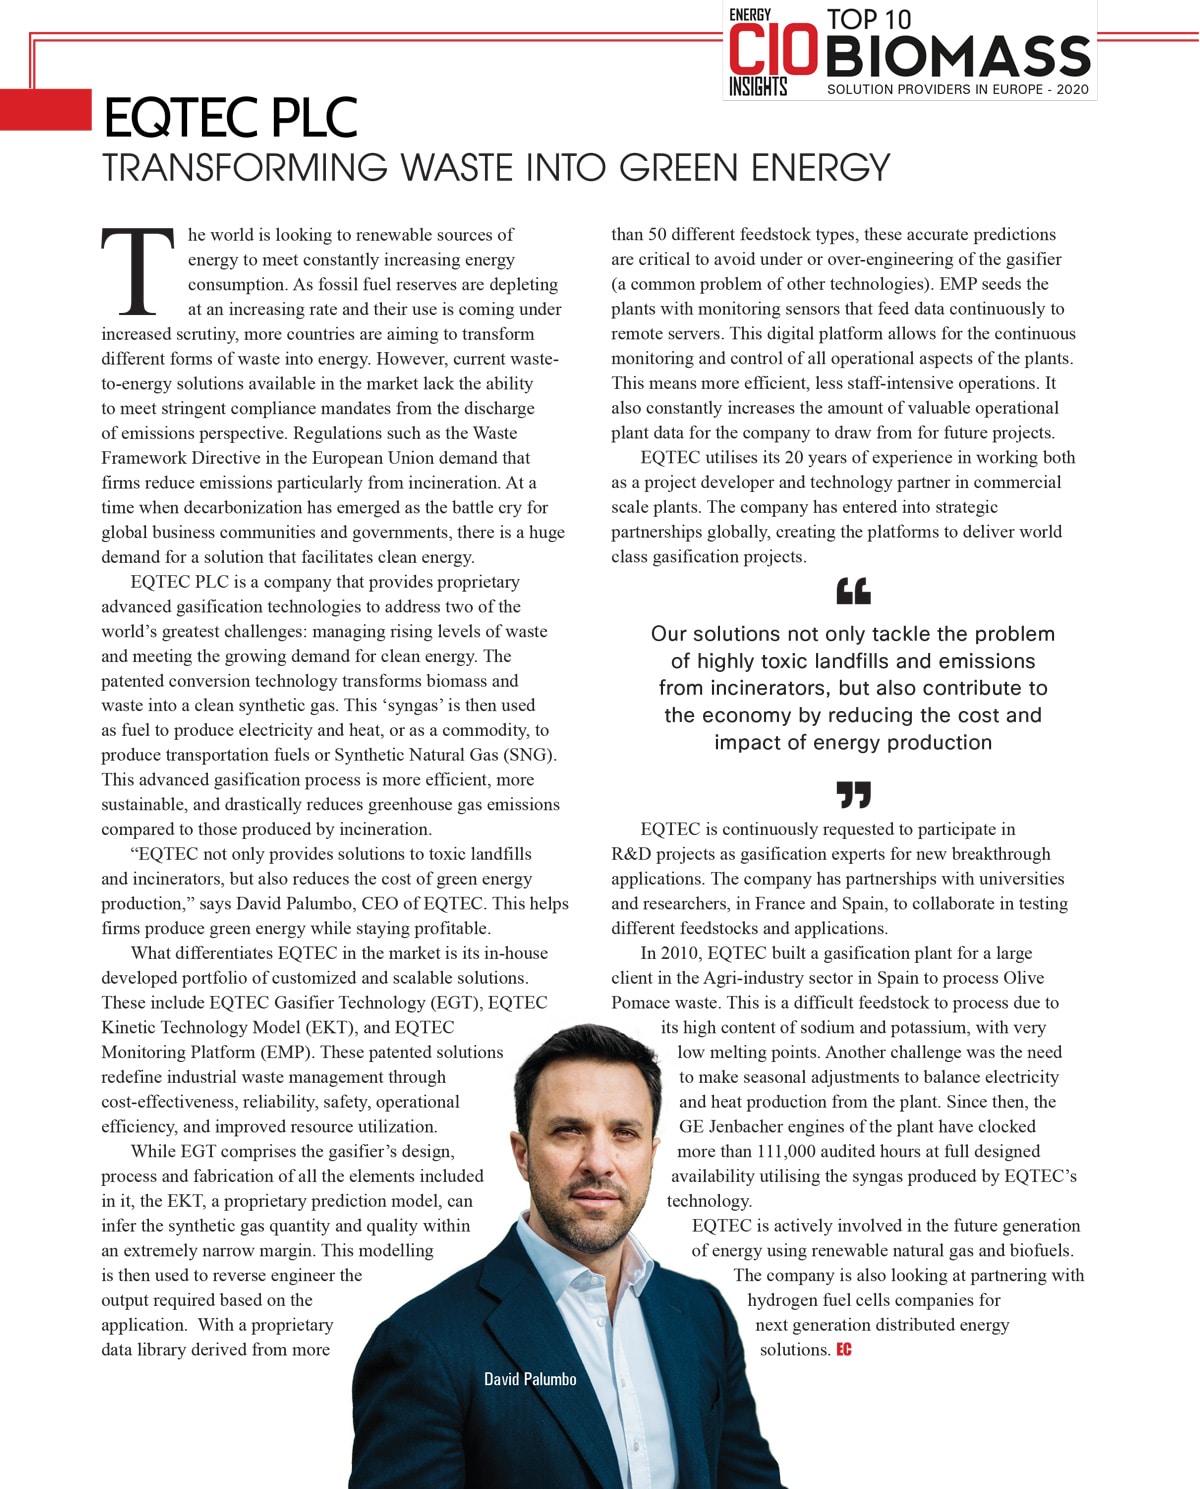 Transforming waste into green energy